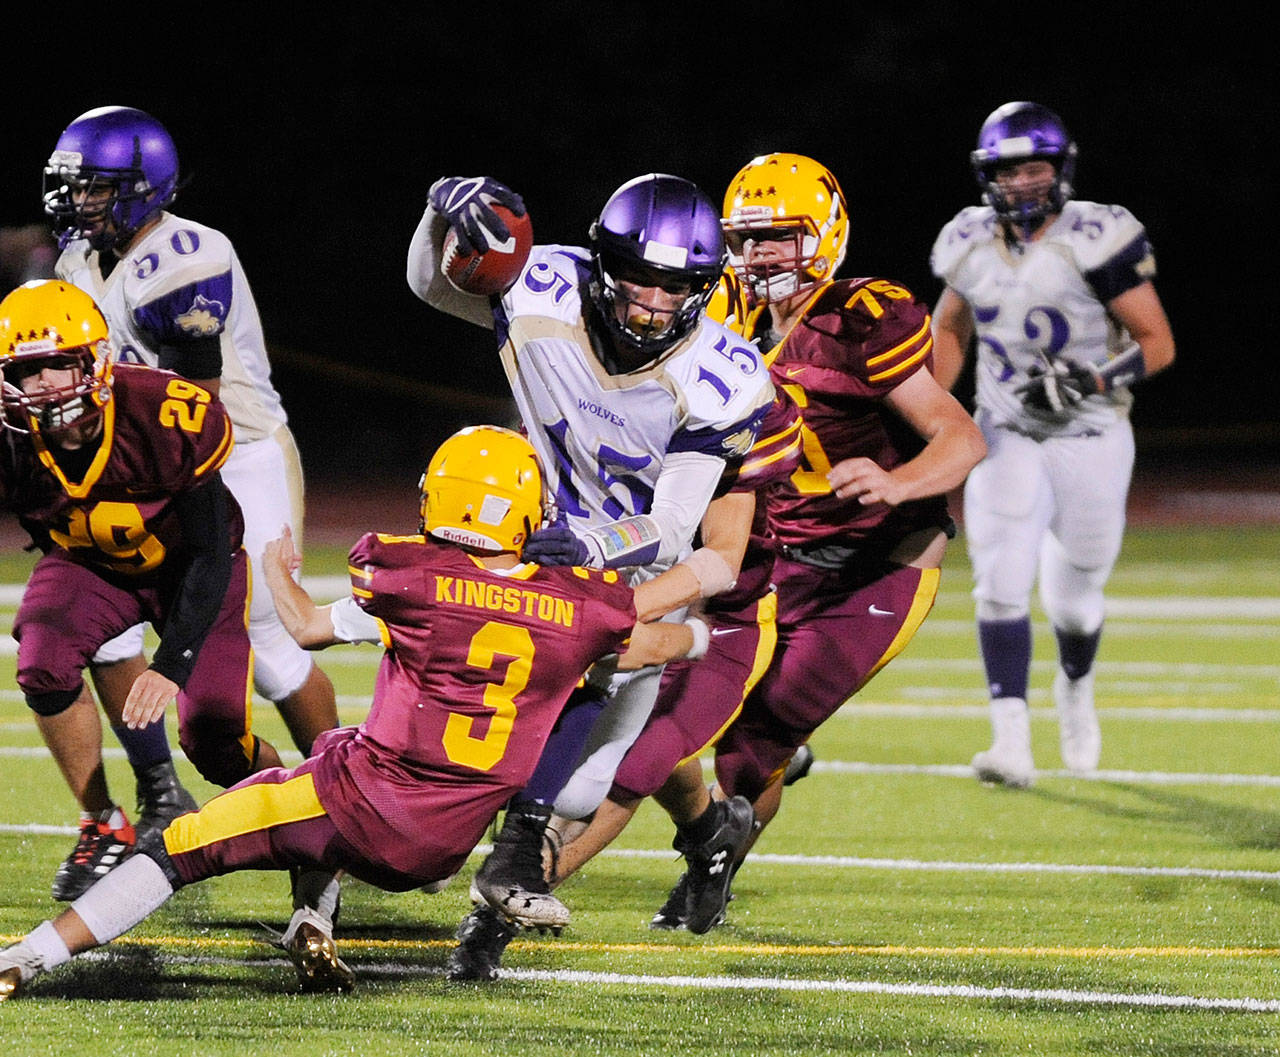 Football: Wolves’ rout gives Wiker win No. 100